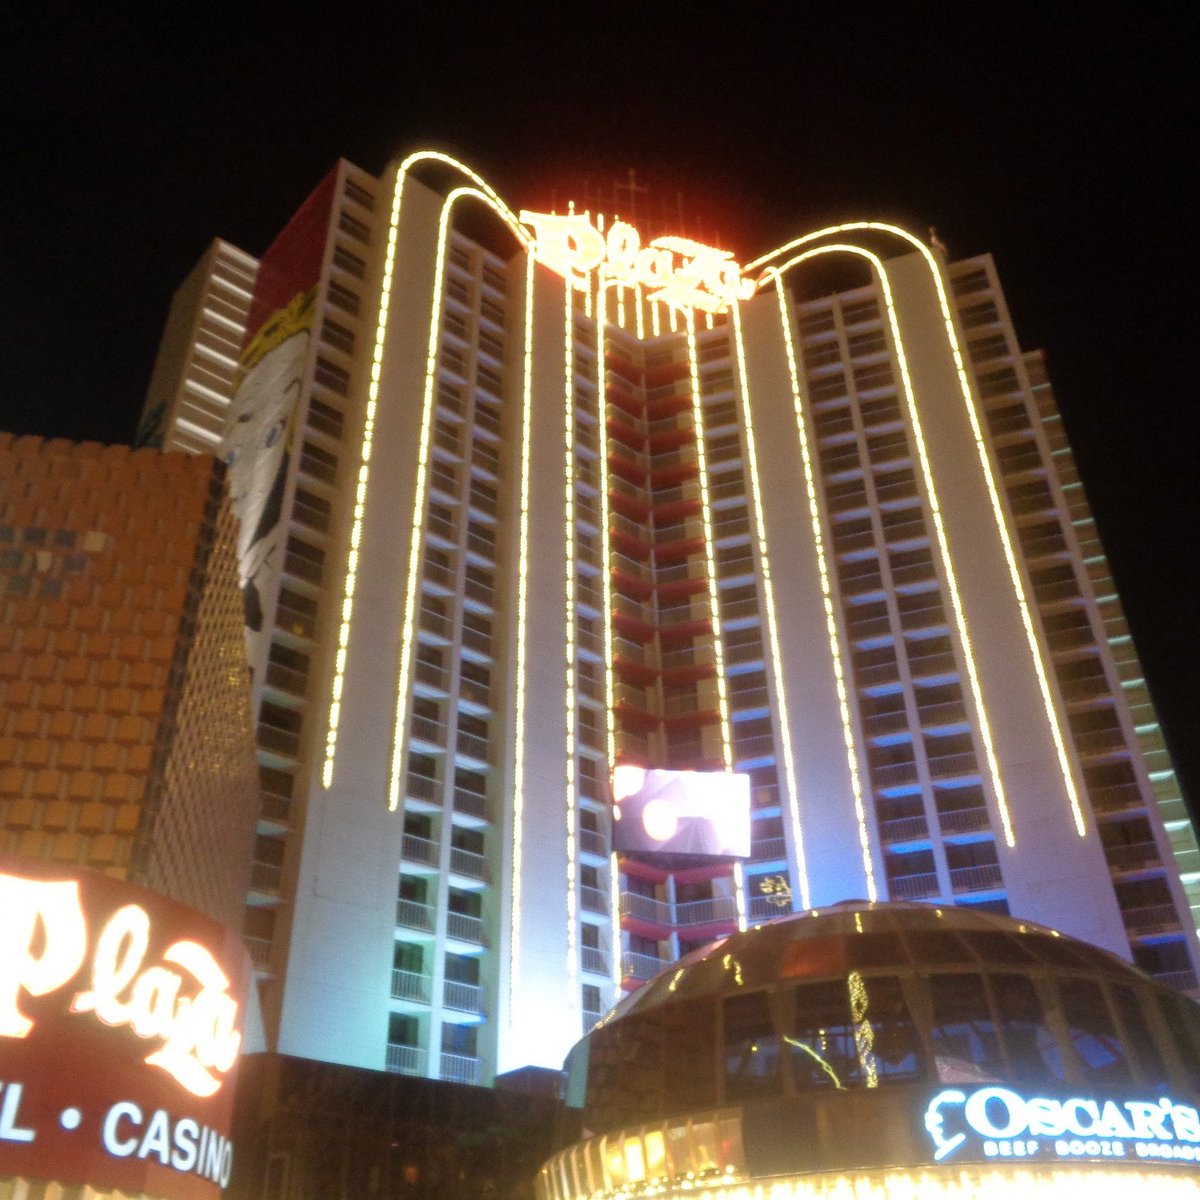 A look inside the Plaza the night before Las Vegas casinos can reopen